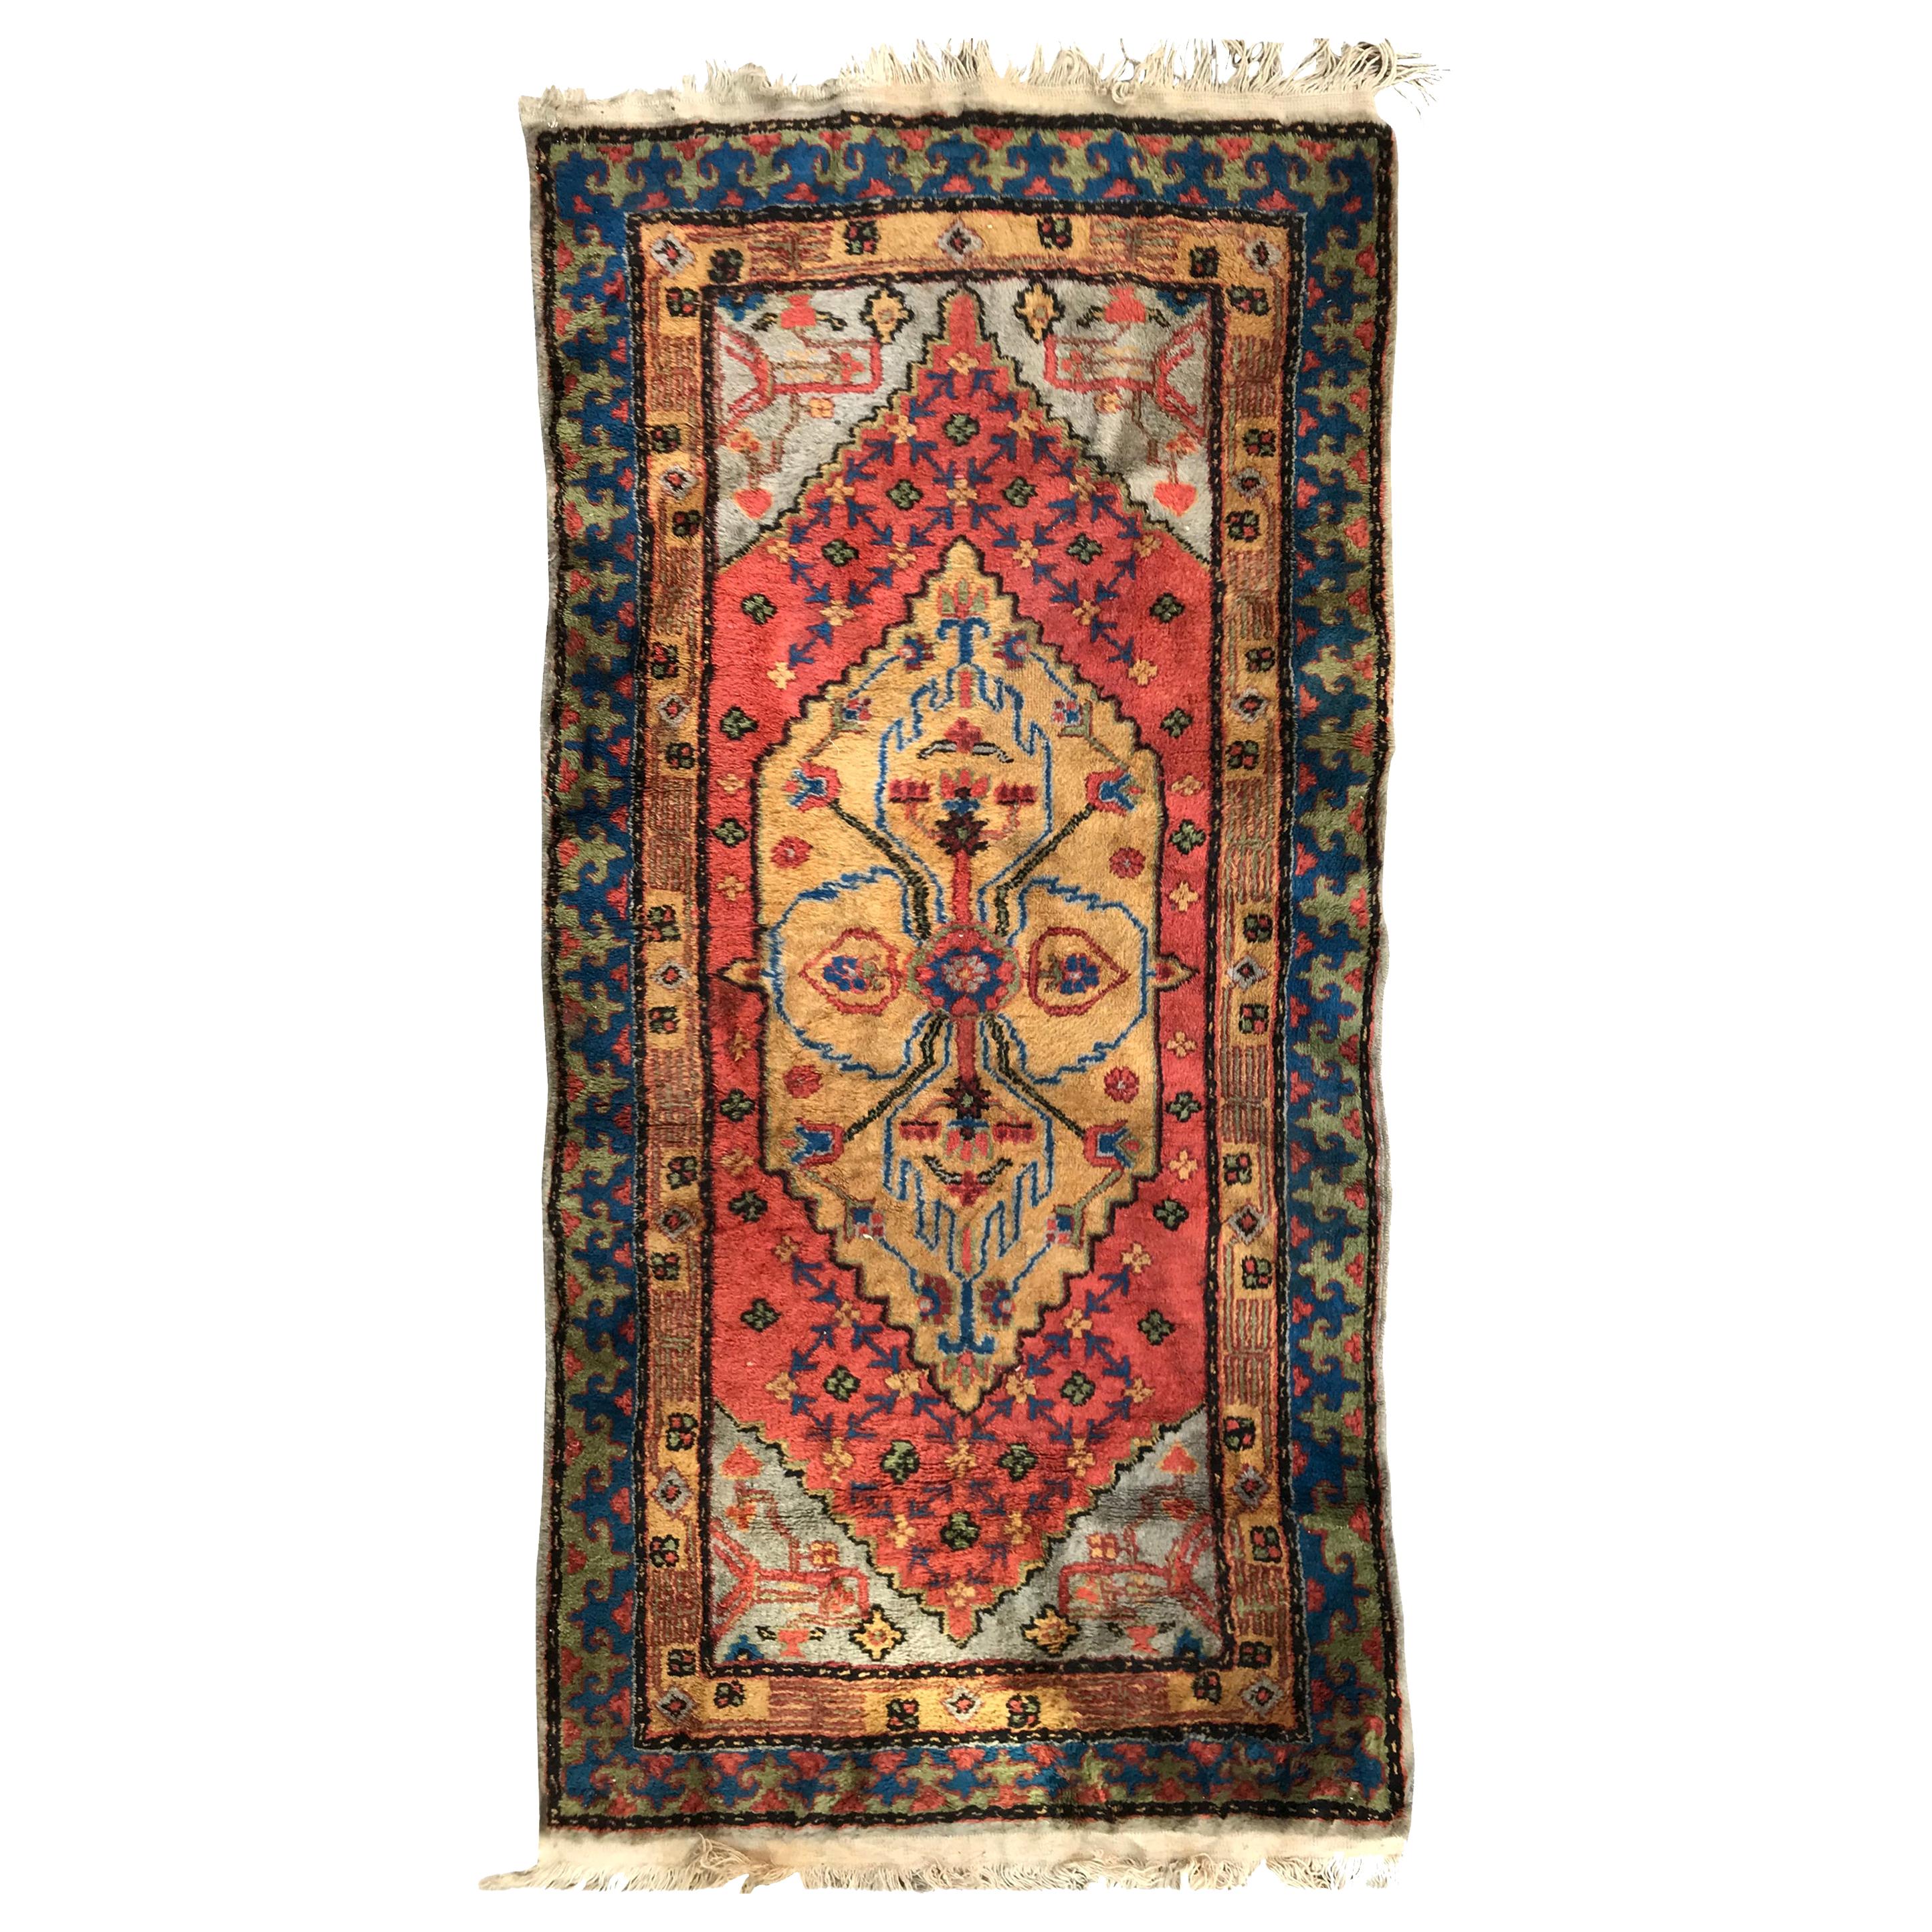 Little Vintage Sinkiang Rug, Antique Persian Style Rugs, 20th Century Carpets